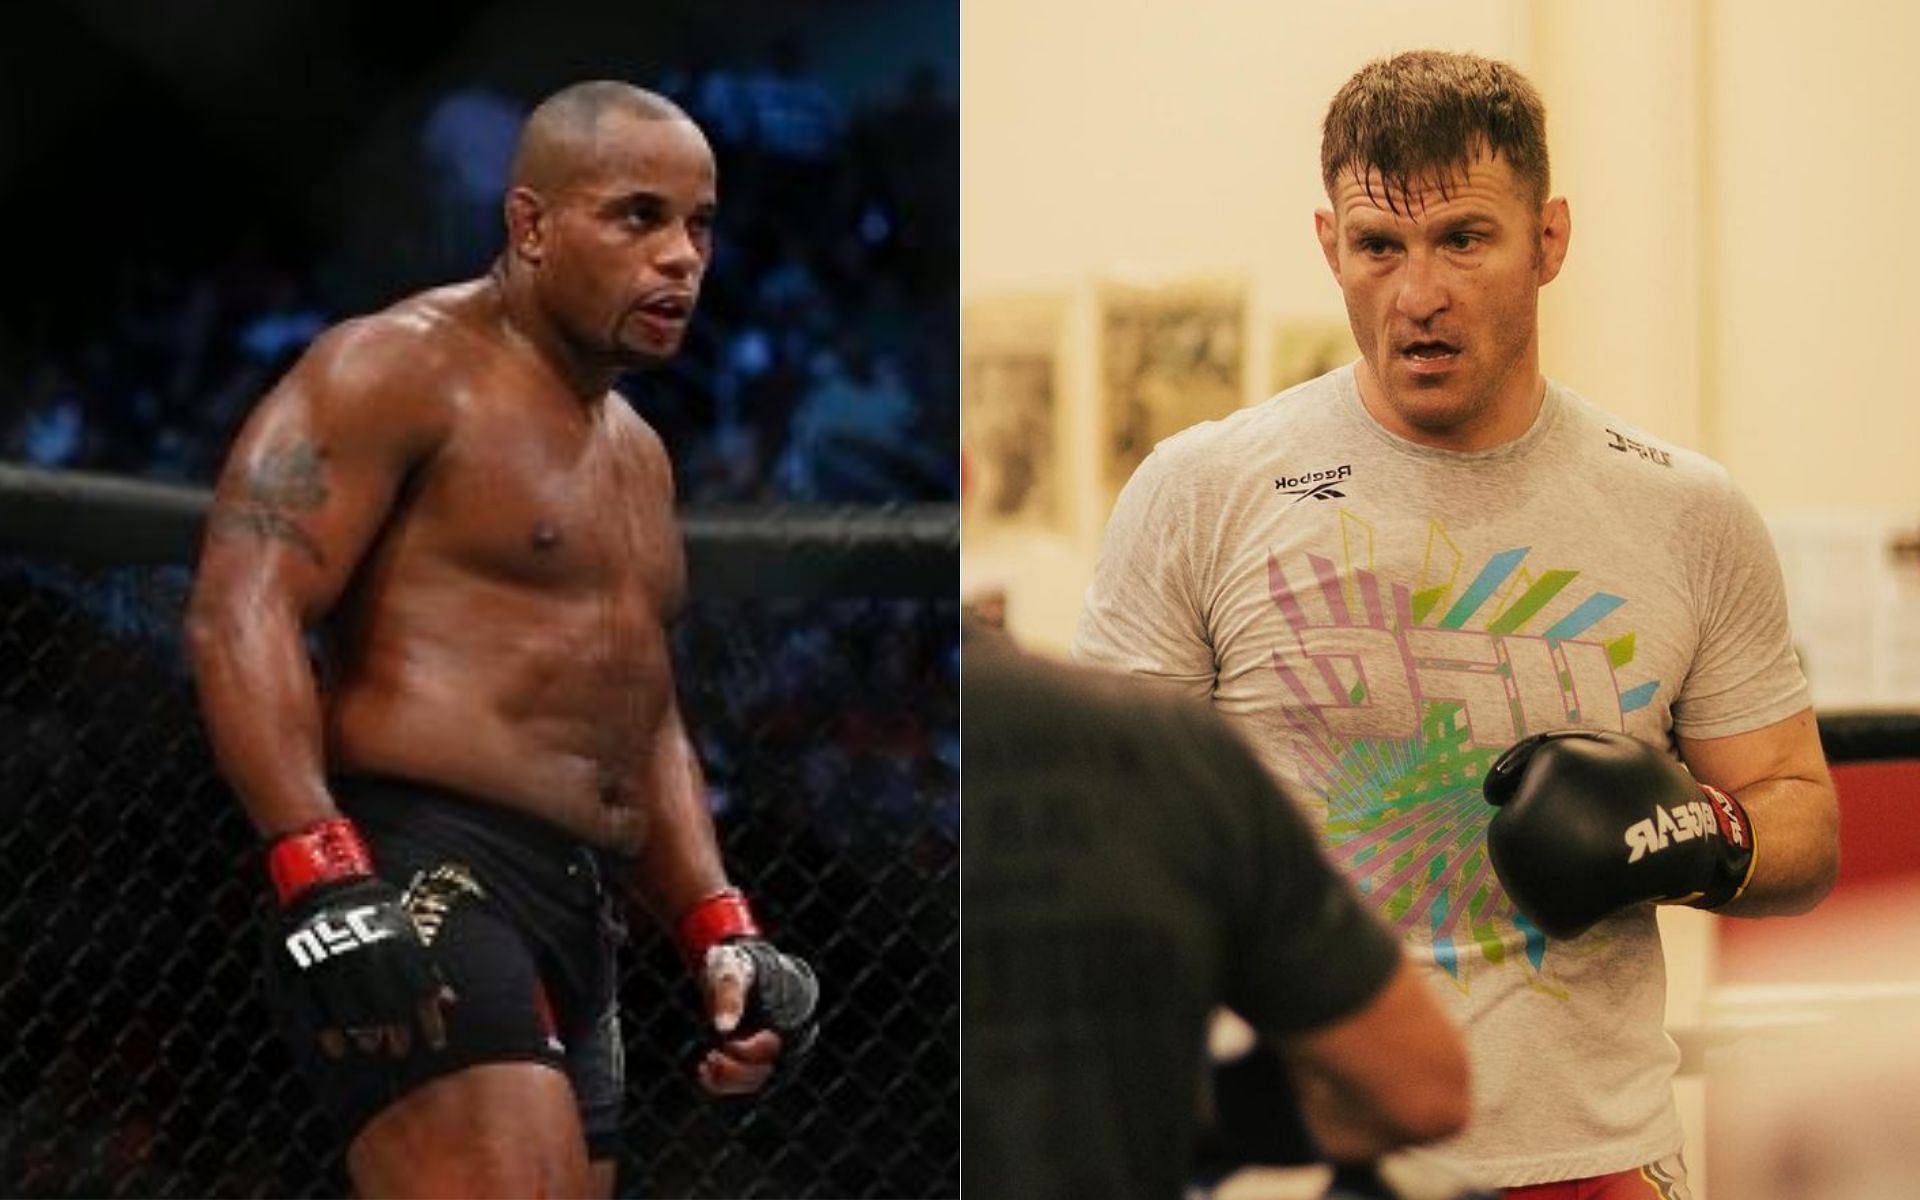 Daniel Cormier (left) and Stipe Miocic (right) [Image credits: @dc_mma and @stipemiocic on Instagram]